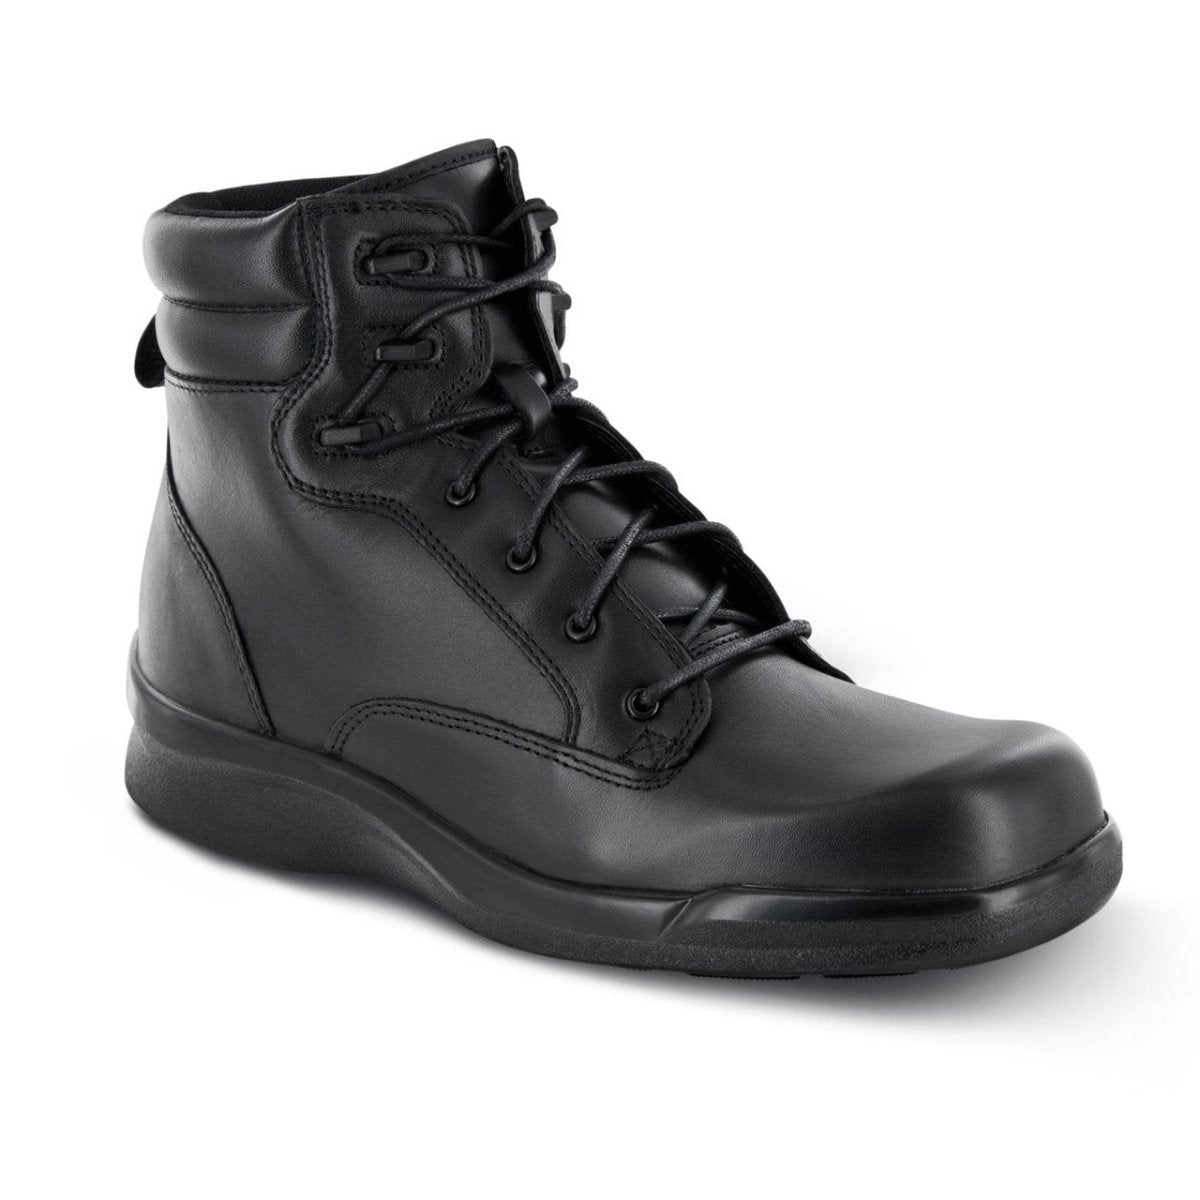 APEX B4500M AMBULATOR BIO LACE-UP MEN'S WORK BOOT IN BLACK - TLW Shoes